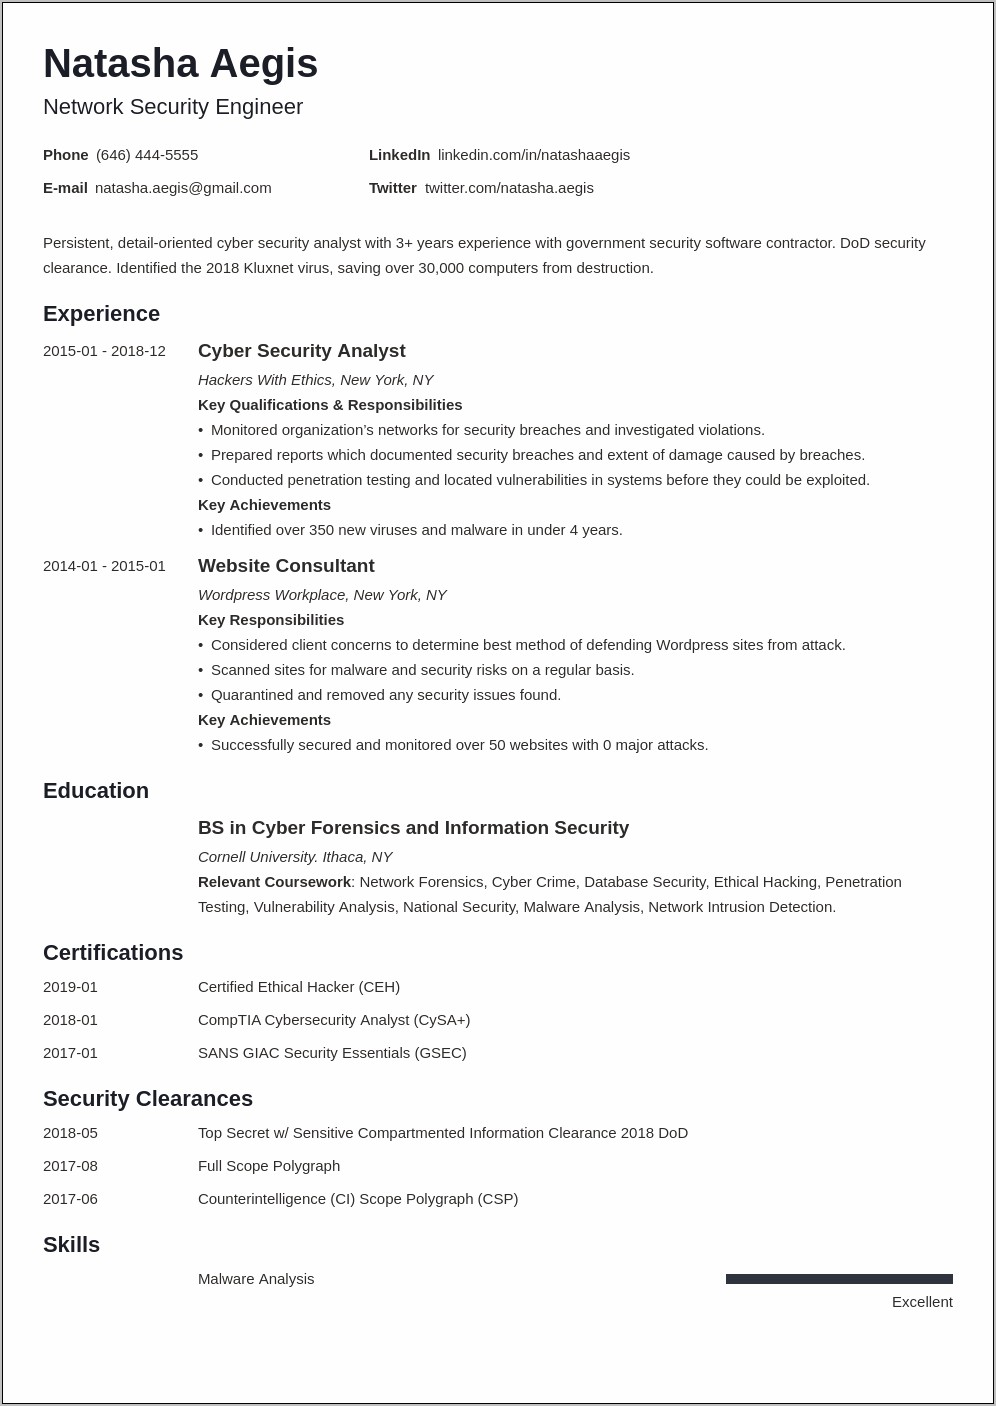 Resume Skills To List For Your Security Engineer